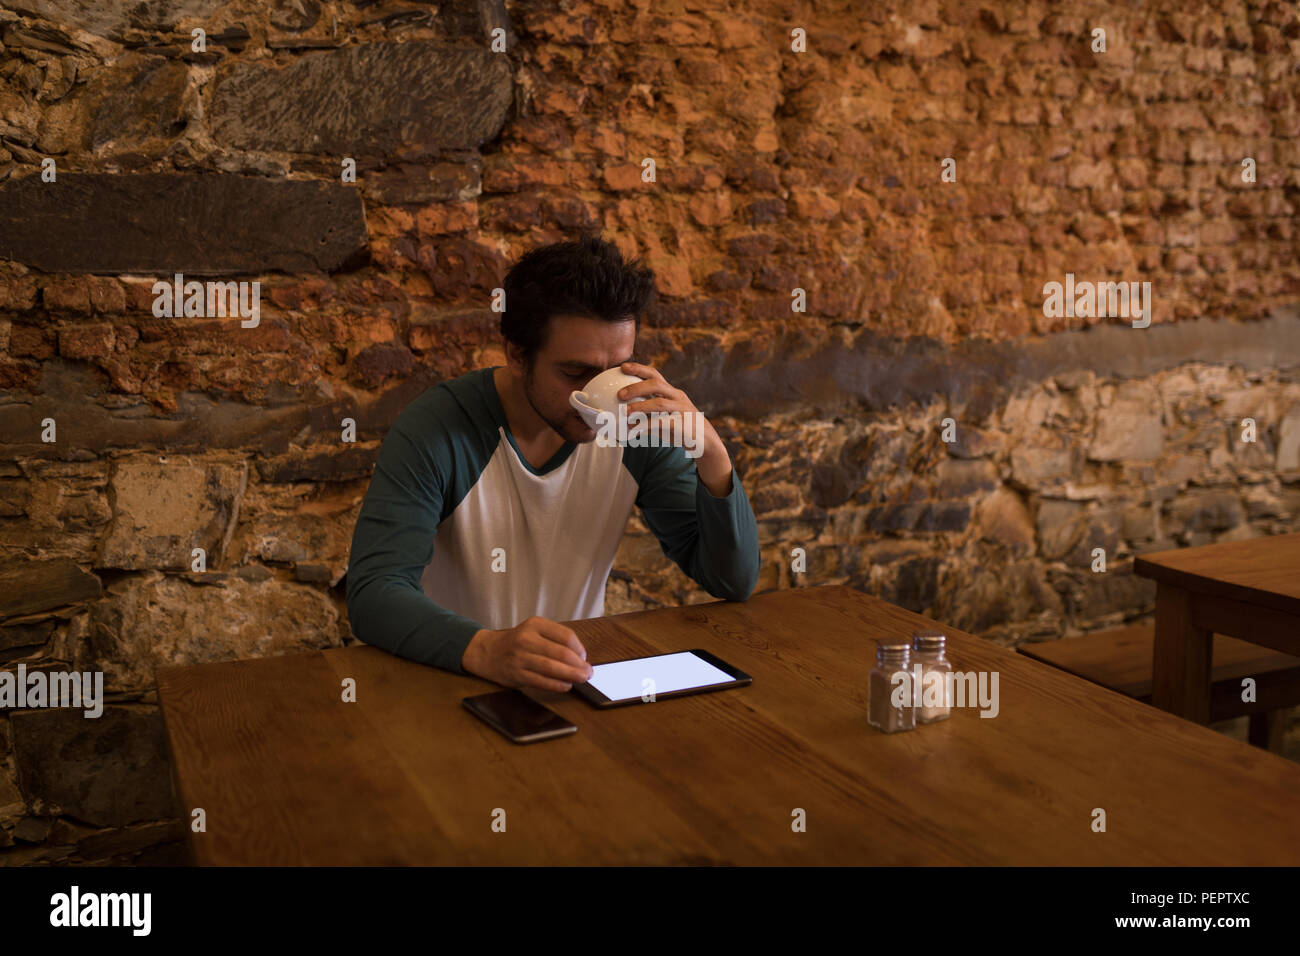 Businessperson having coffee while using a digital tab Stock Photo